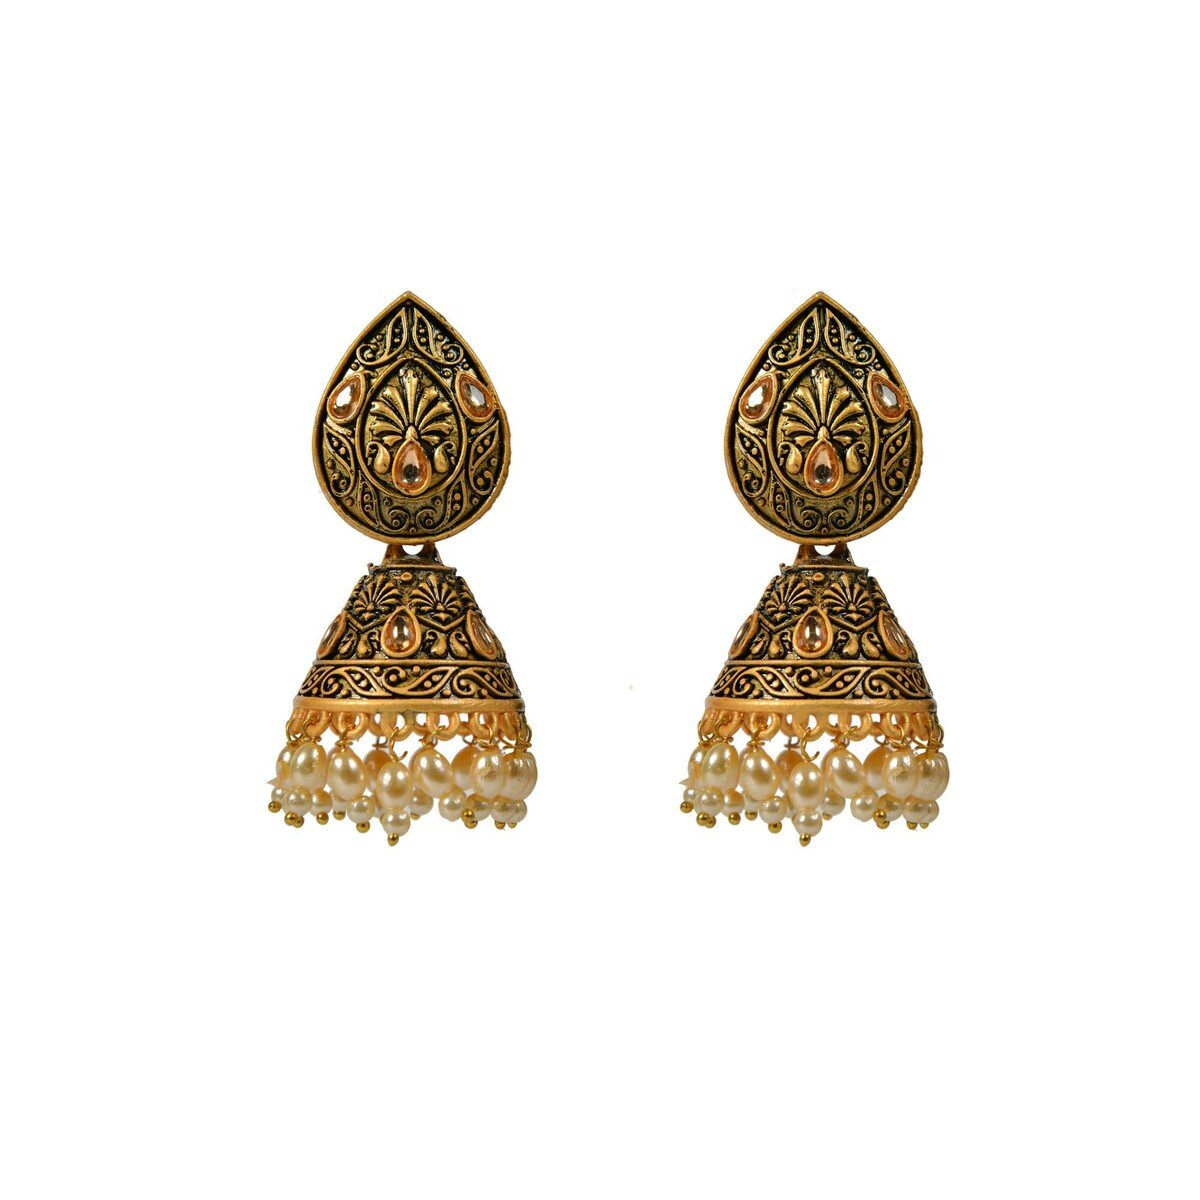 Eten Traditional Ethnic Earrings Antique Oxidized Gold Color WB033